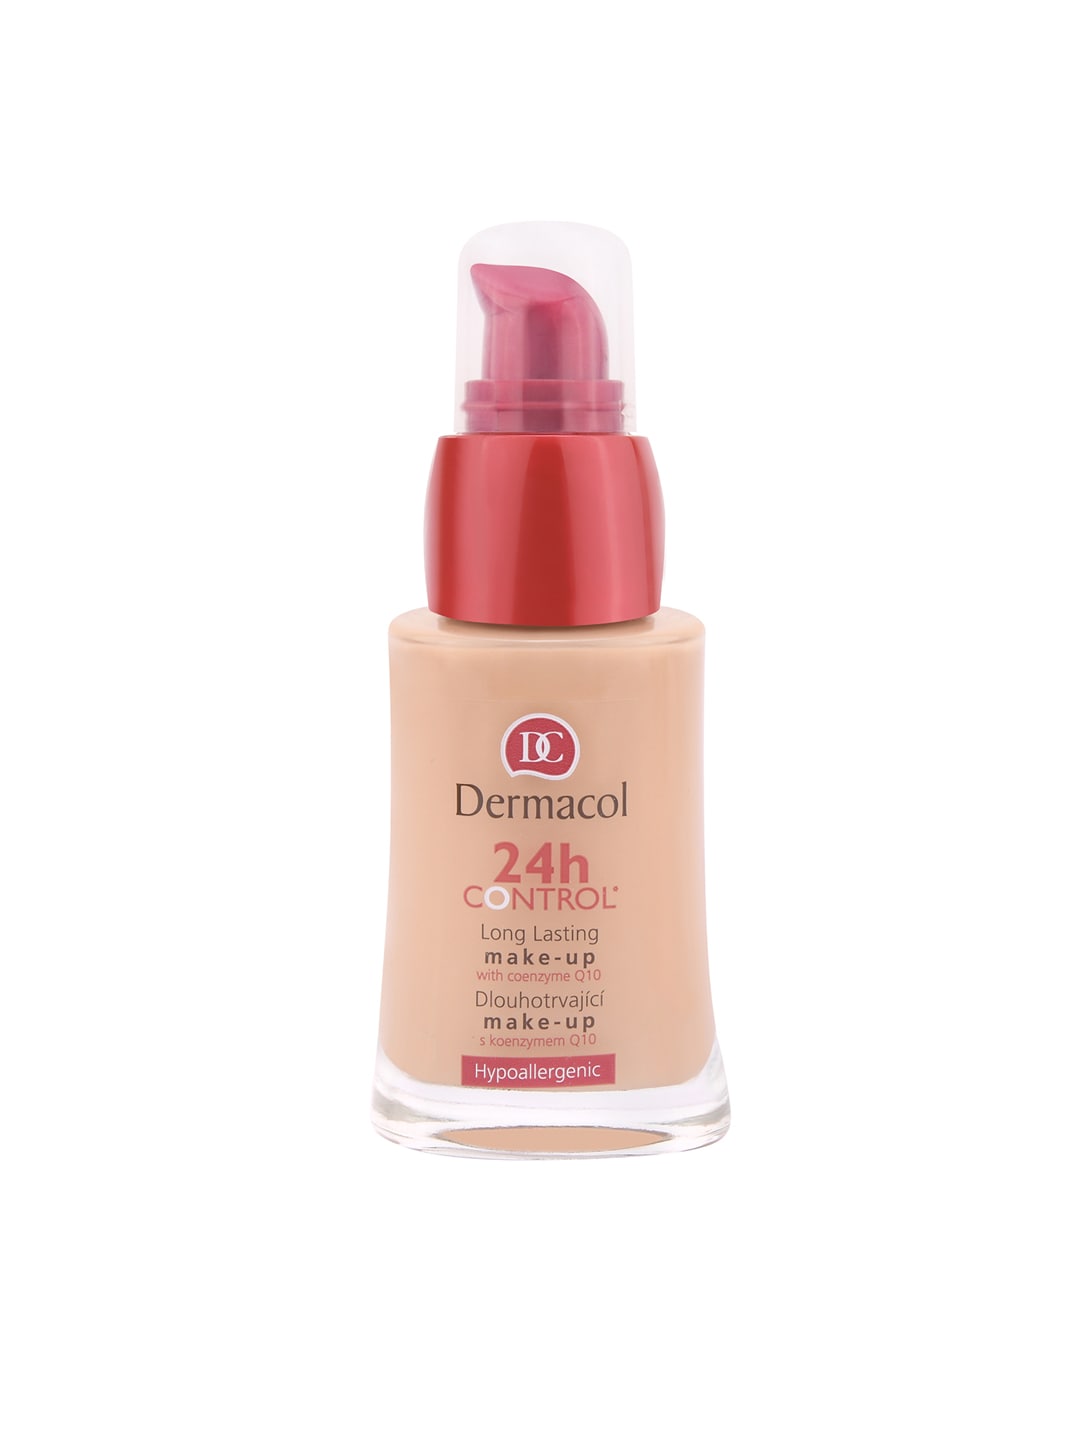 Dermacol 24H Control Make-up Foundation Cream 03 - 30 ml Price in India